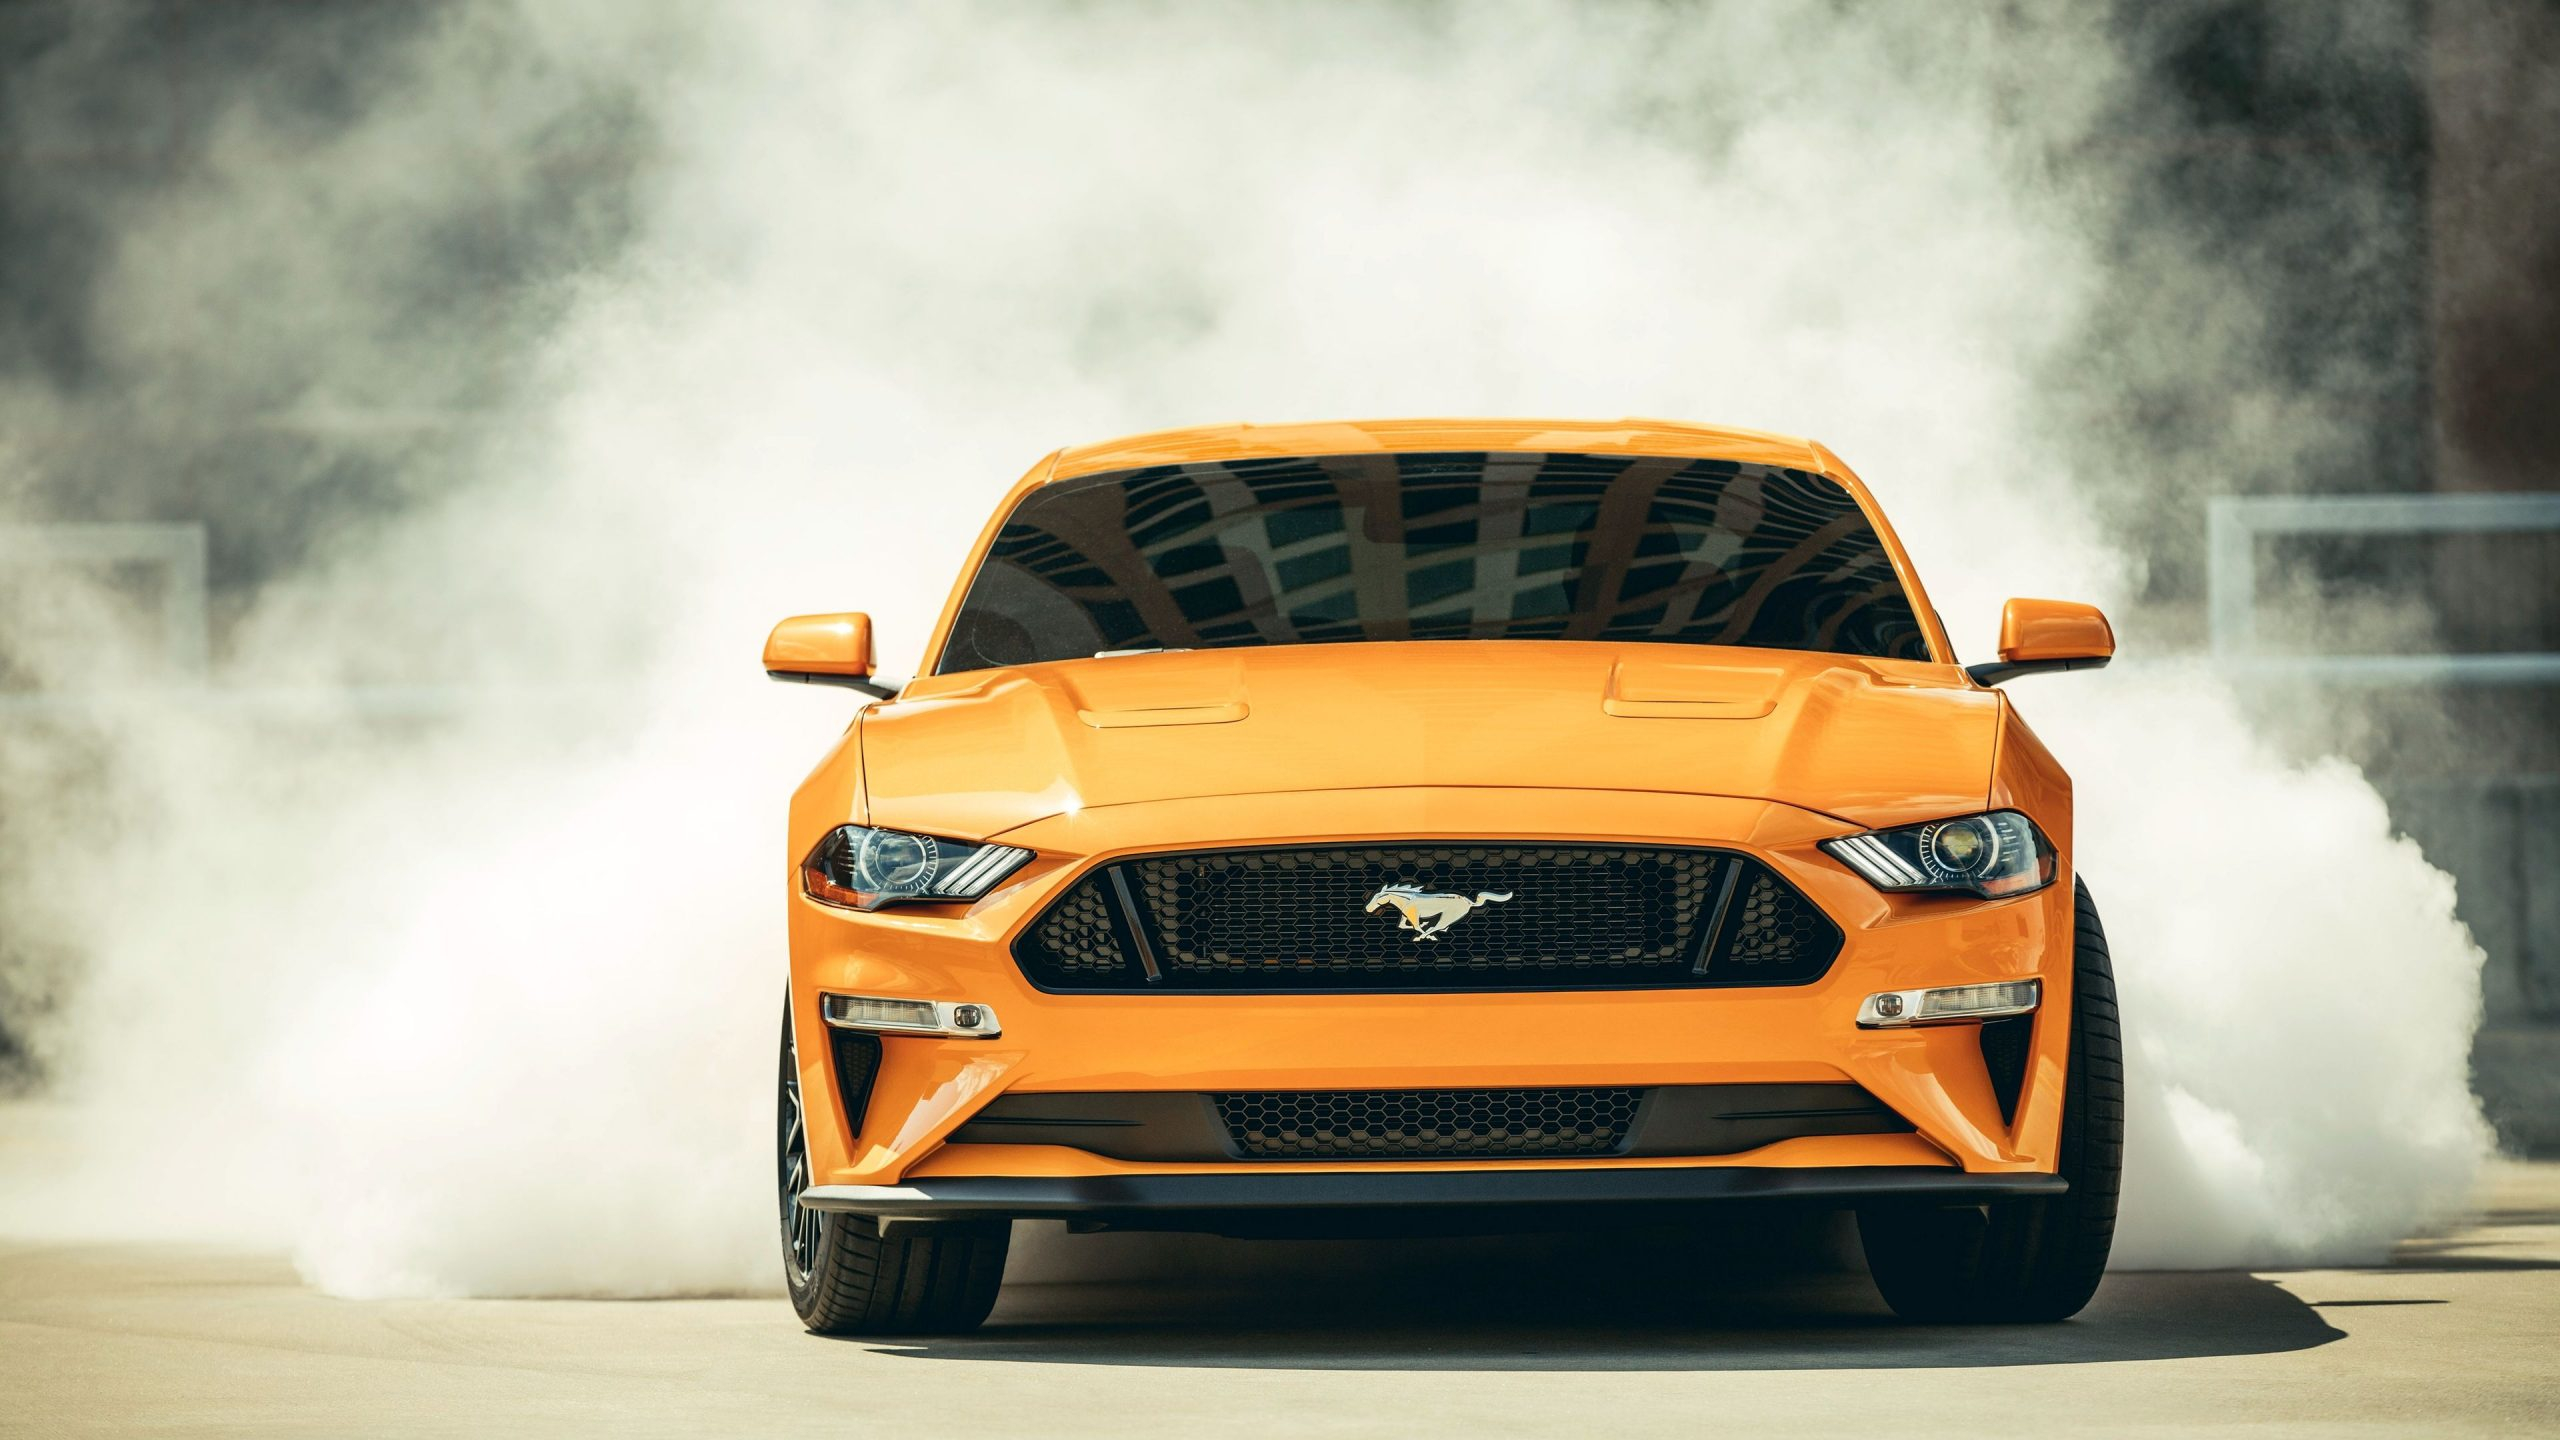 2560x1440 2018 Ford Mustang Wallpapers